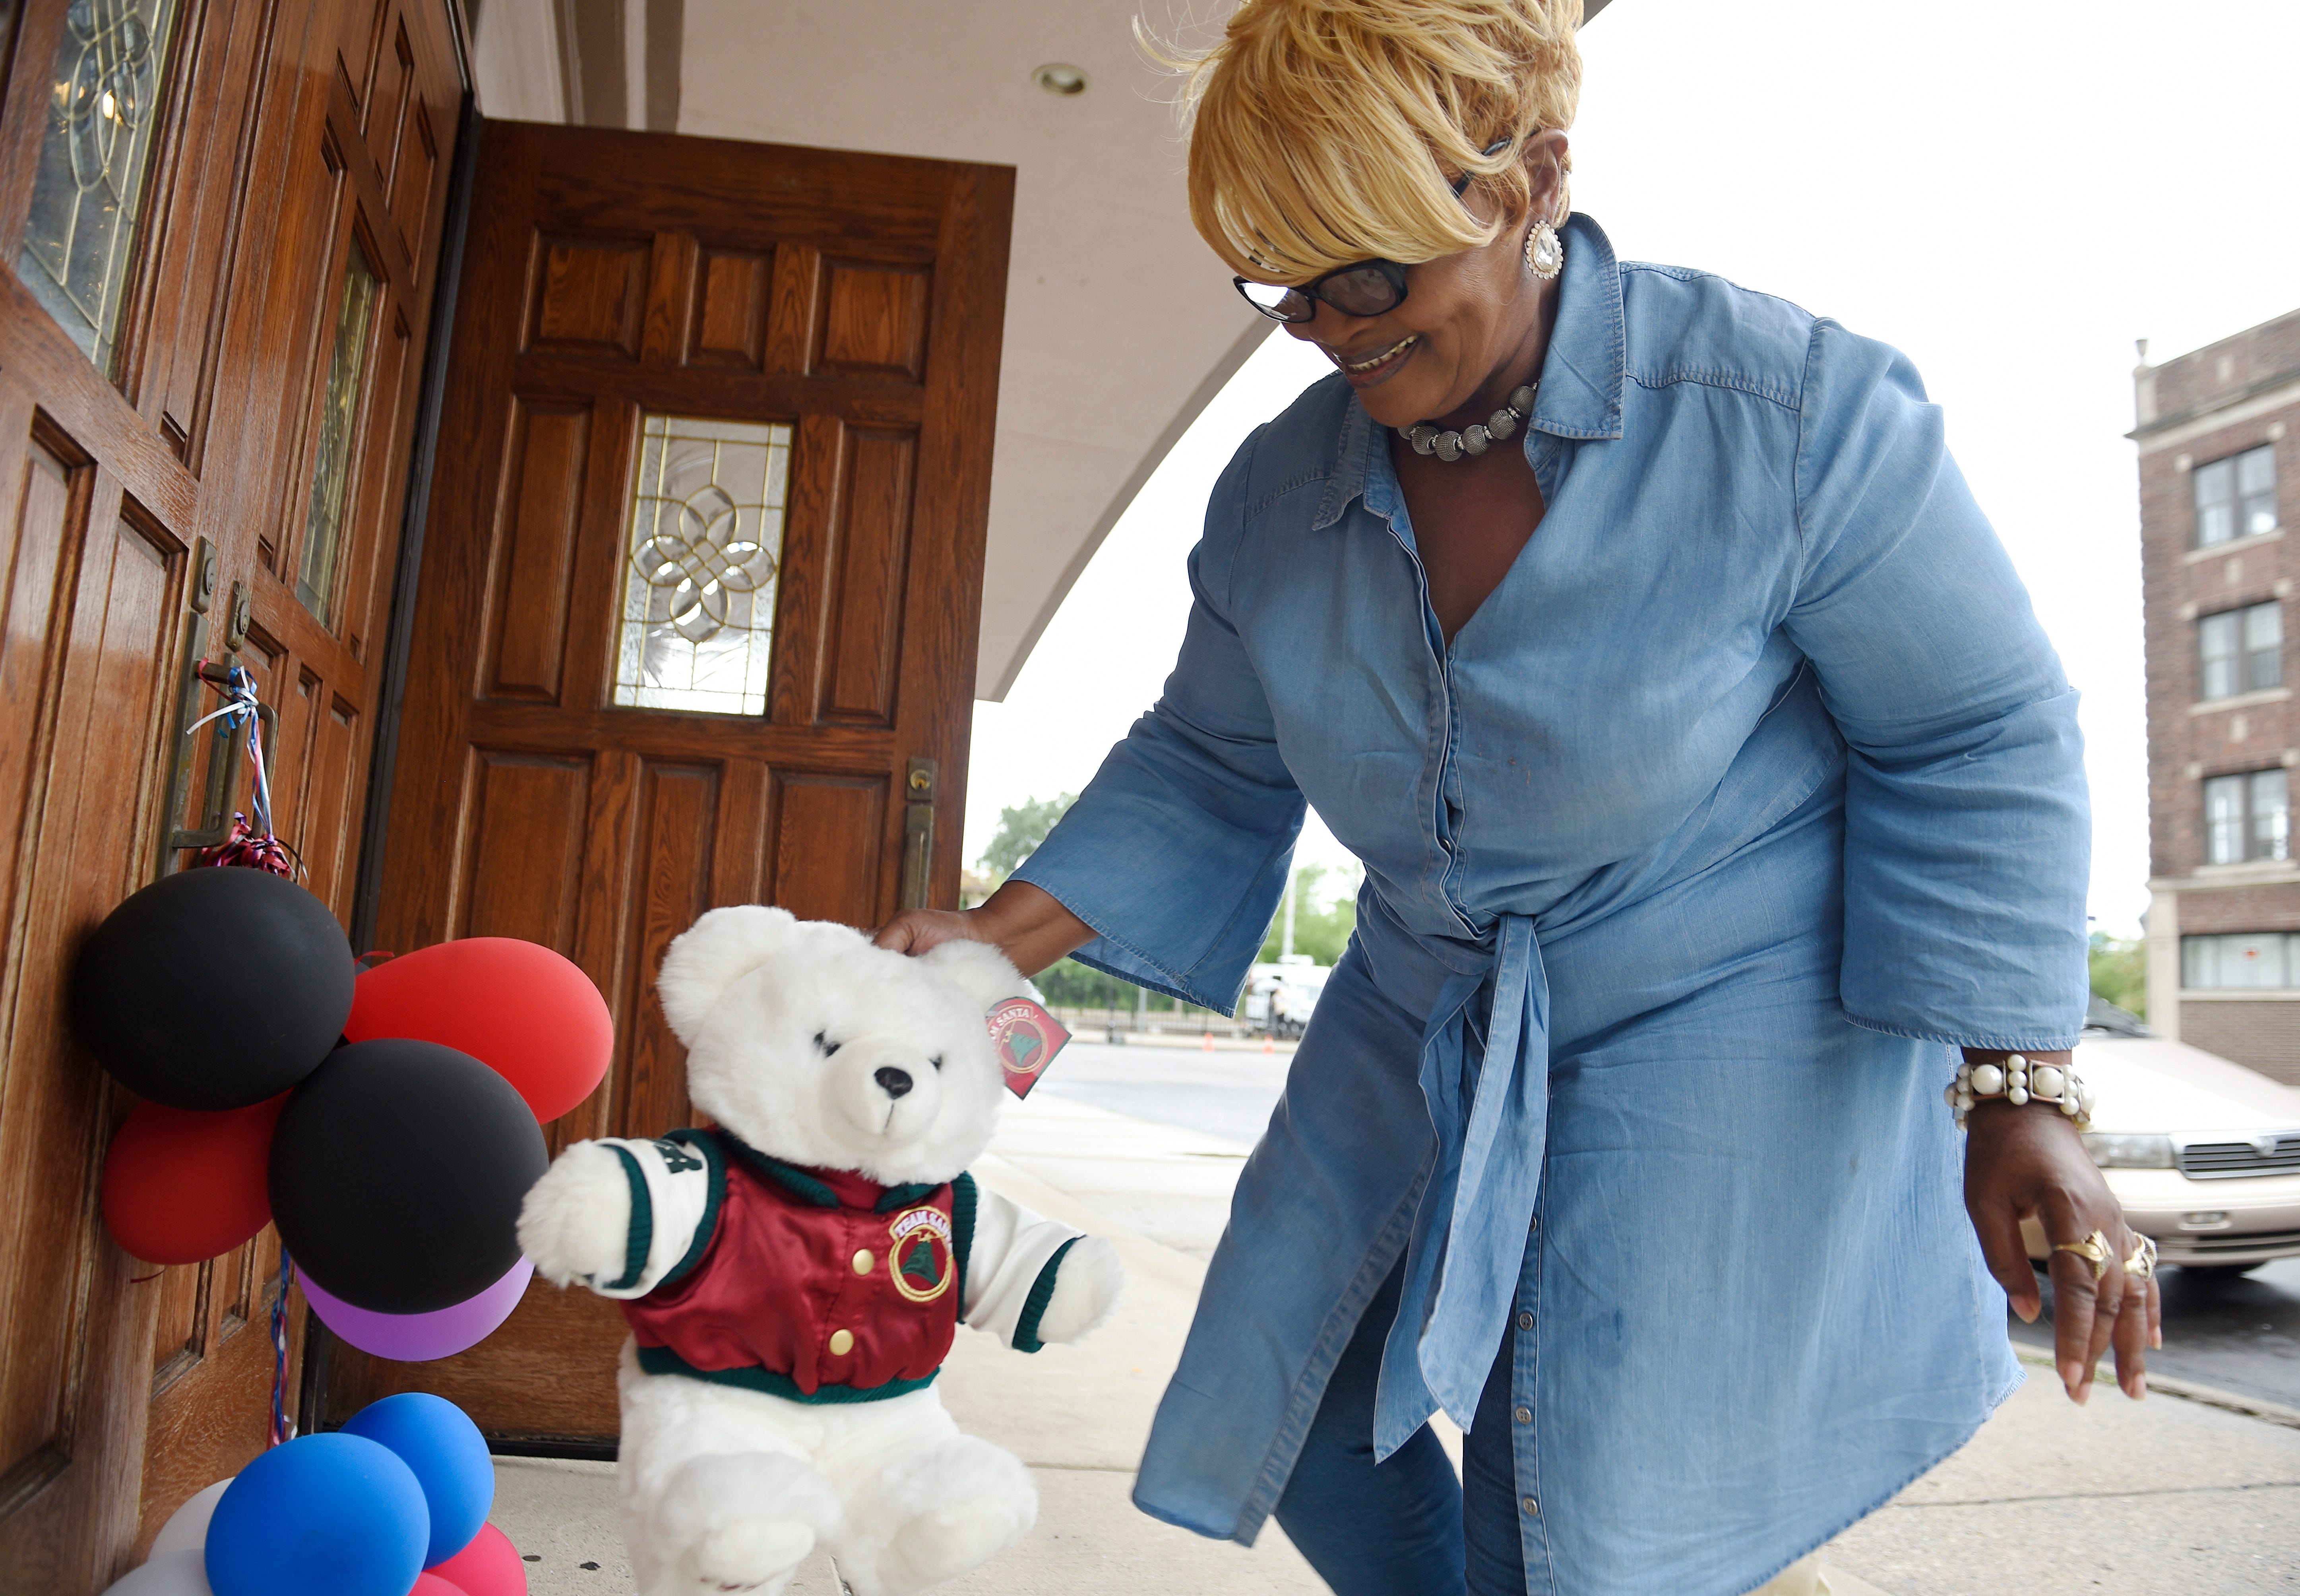 Sennettra Allen, 66, of Detroit pays her respects by leaving a teddy bear at a makeshift memorial outside New Bethel Baptist Church in Detroit, Aug. 16, 2018.